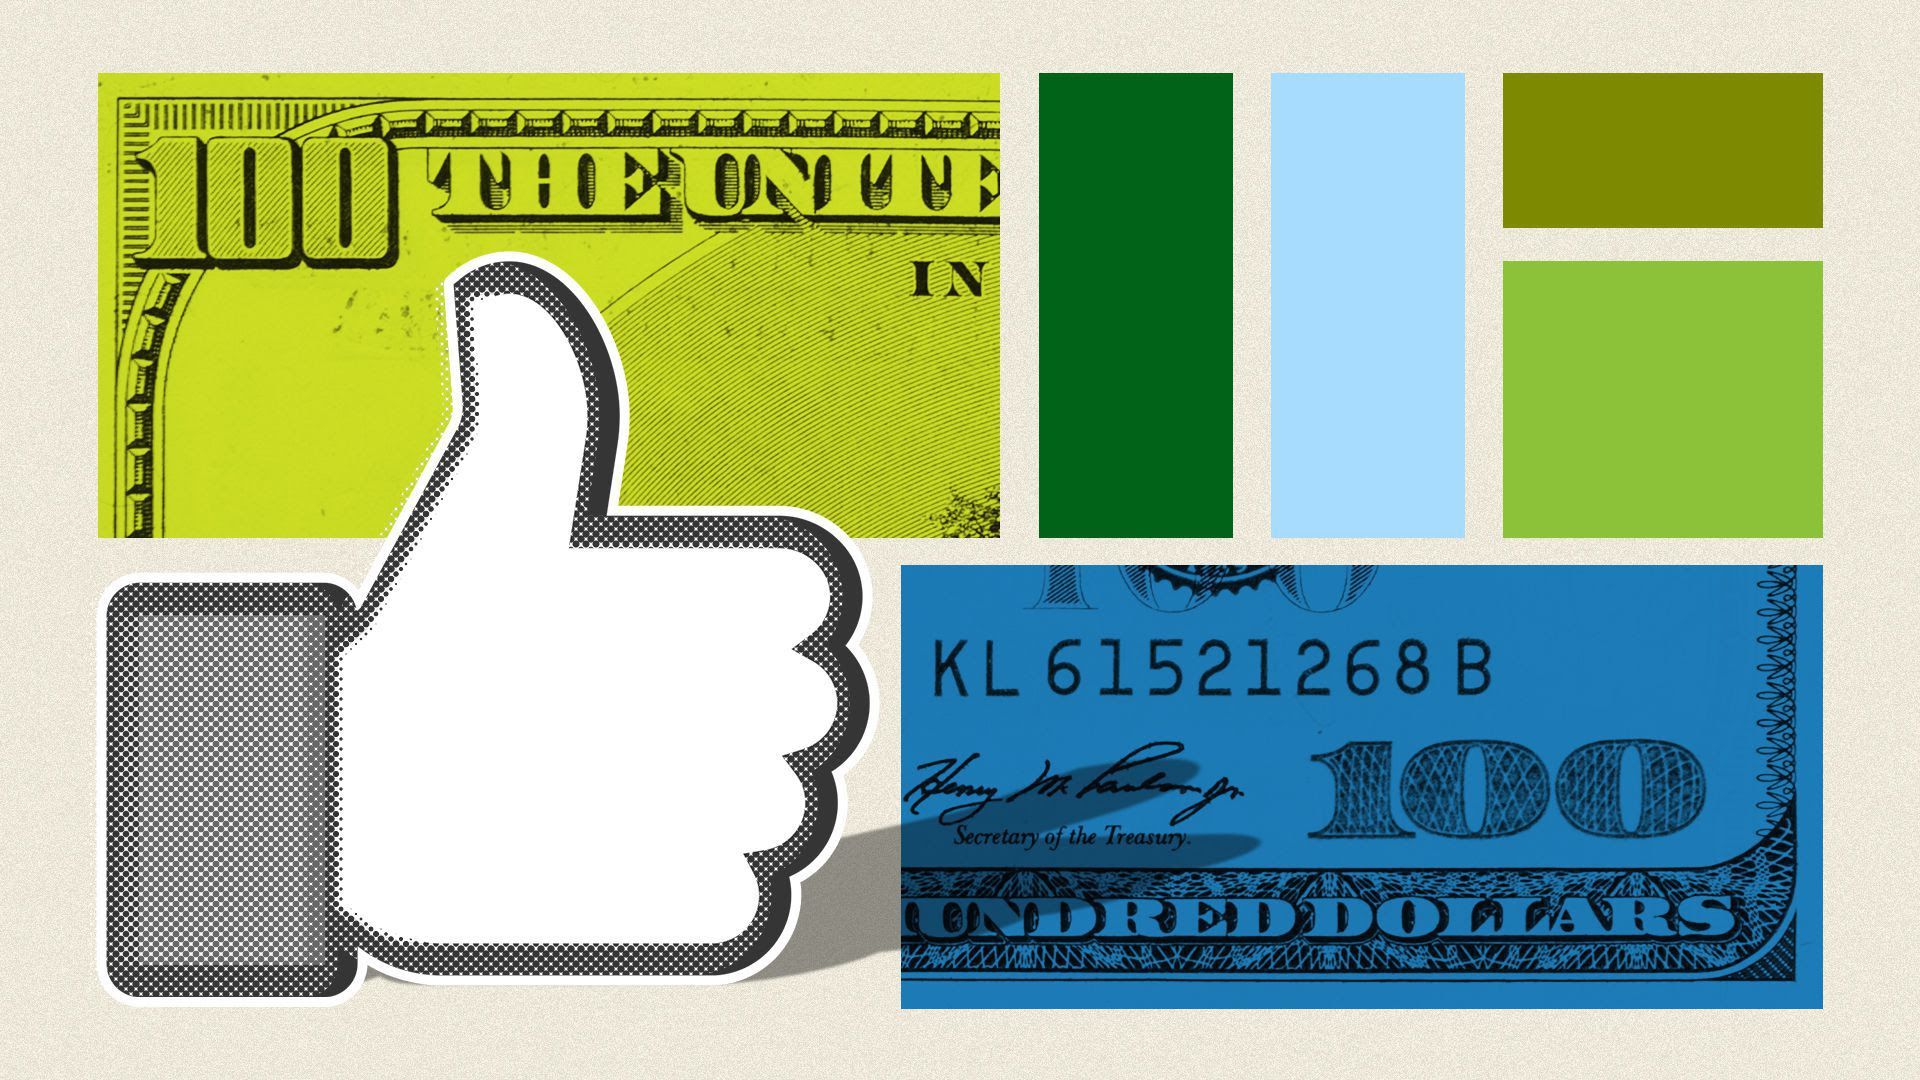 The Facebook thumbs up next to illustrations of money